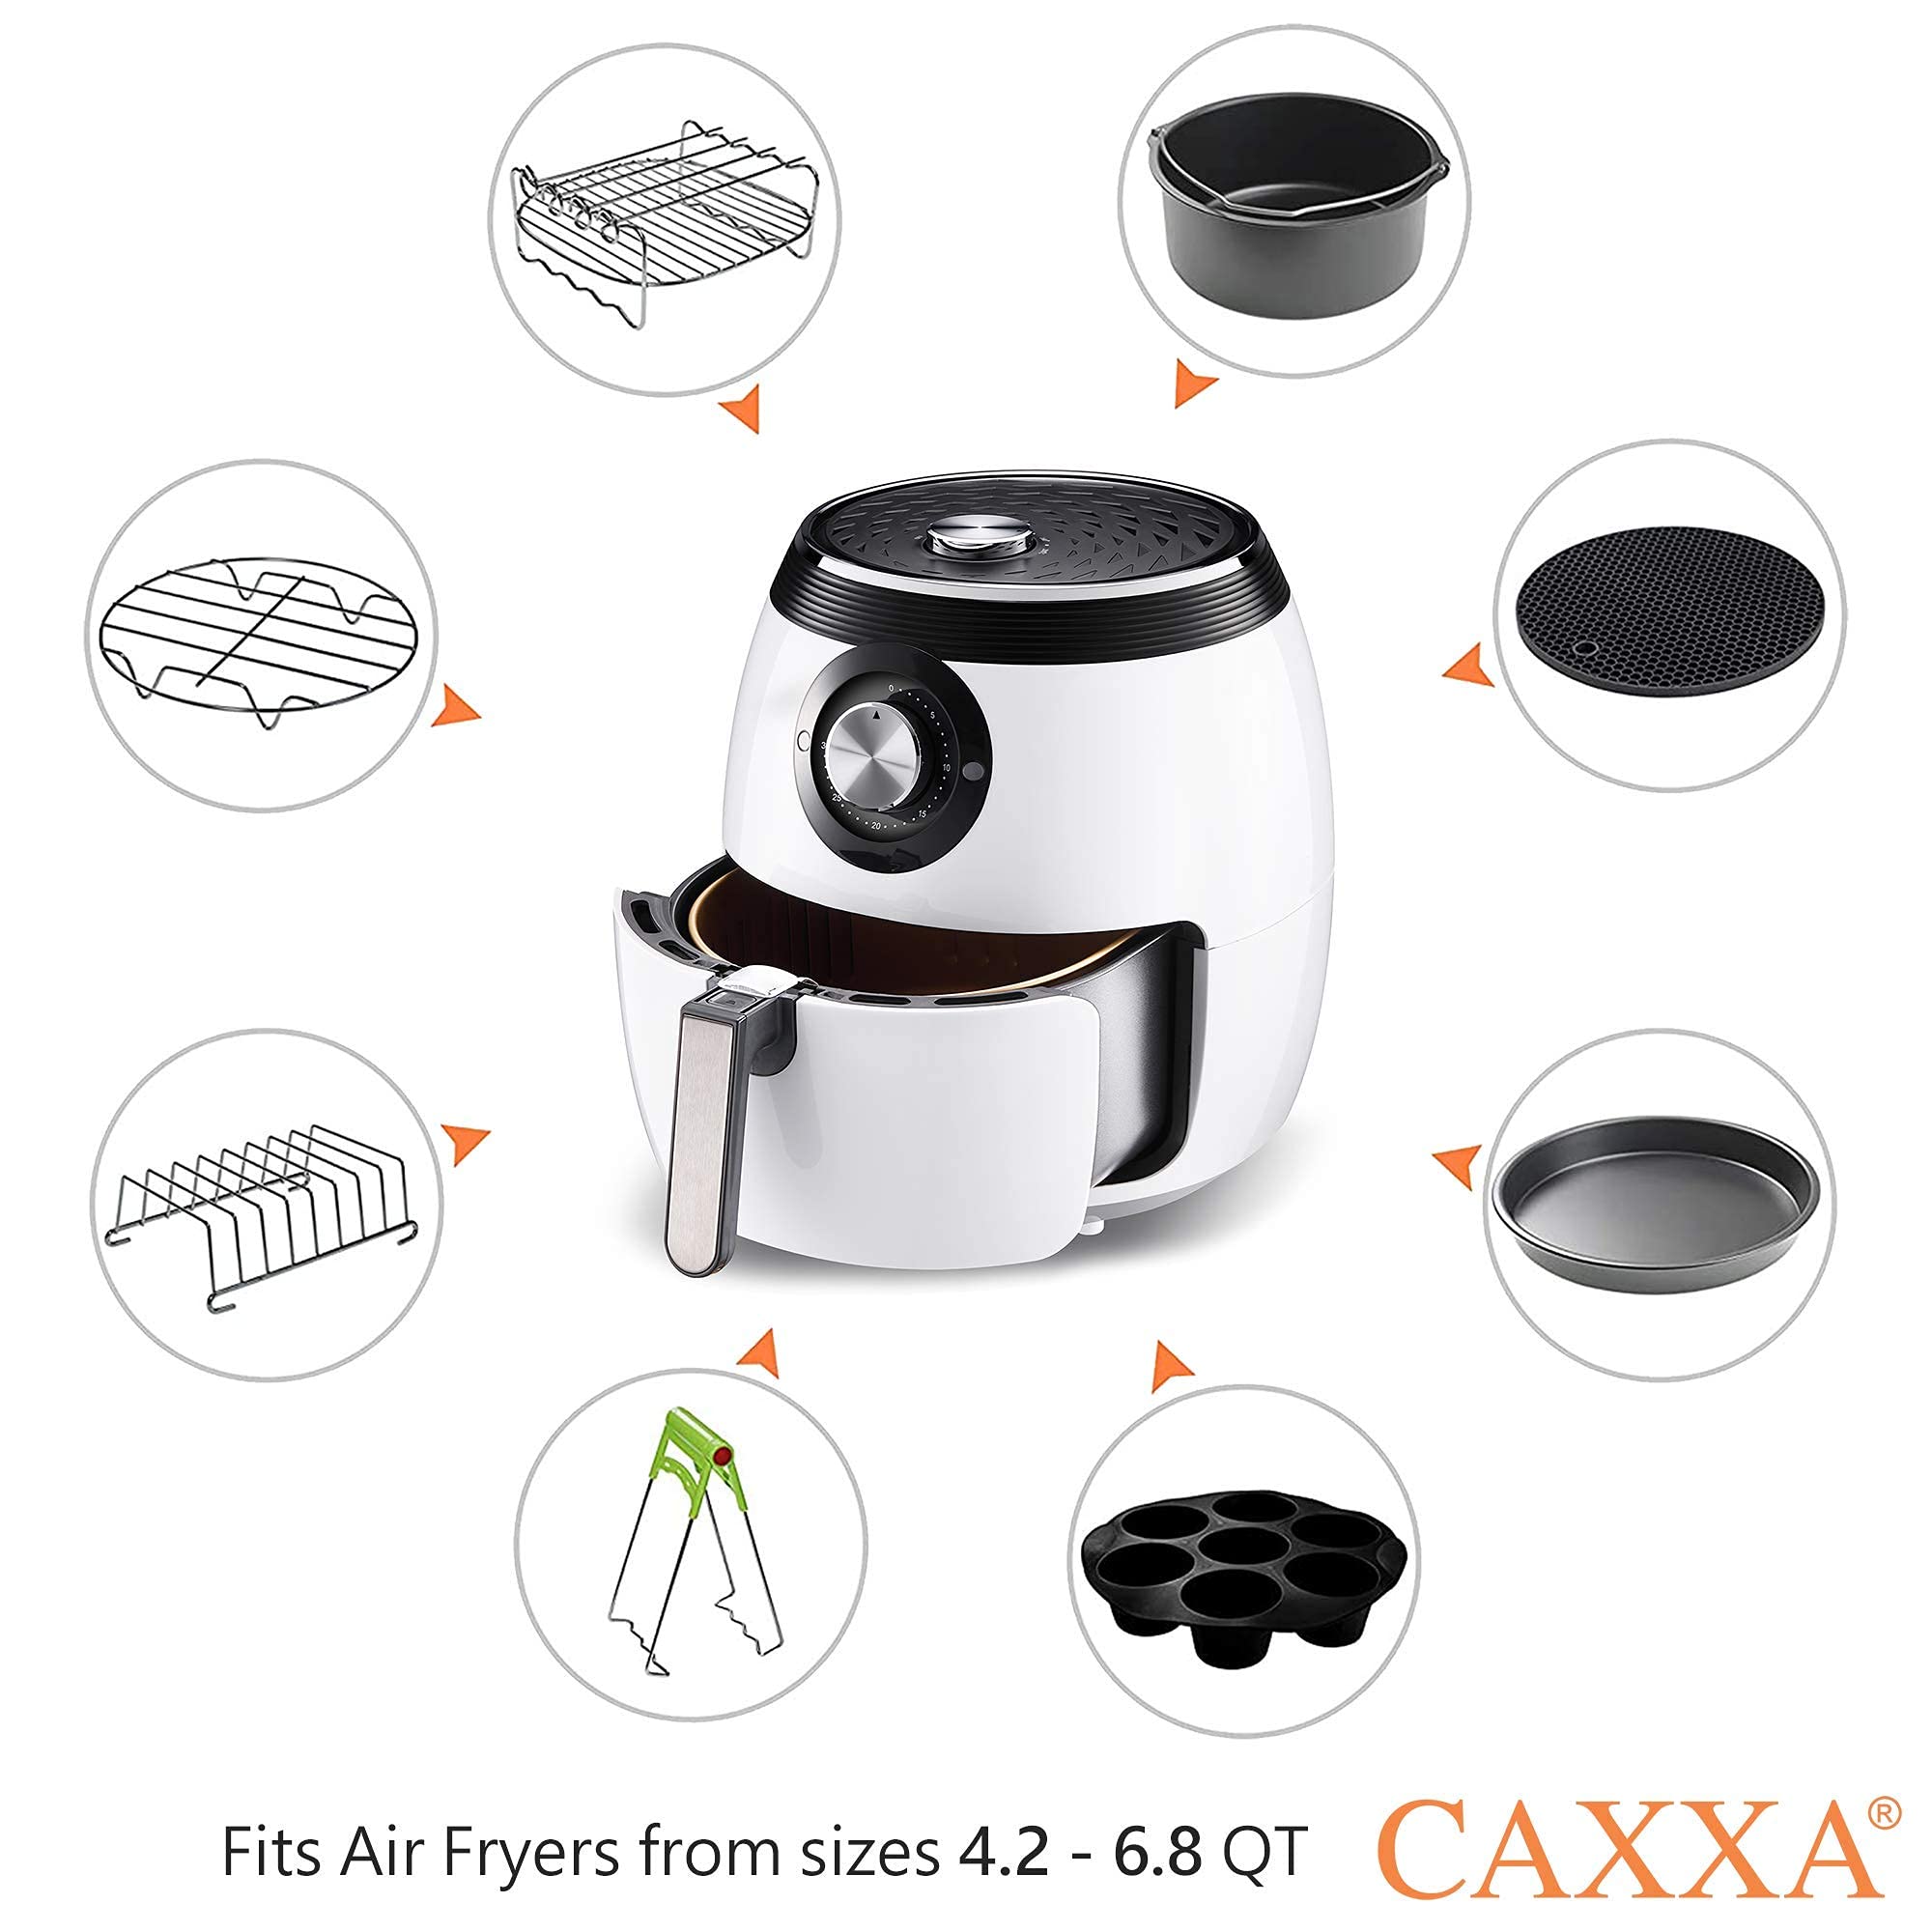 CAXXA 15 PCS 8 Inch XL Air Fryer Accessories, Deep Fryer Accessories with Recipe Cookbook Compatible with Growise Phillips Cozyna Fits All 4.2QT - 5.8QT Air Fryer